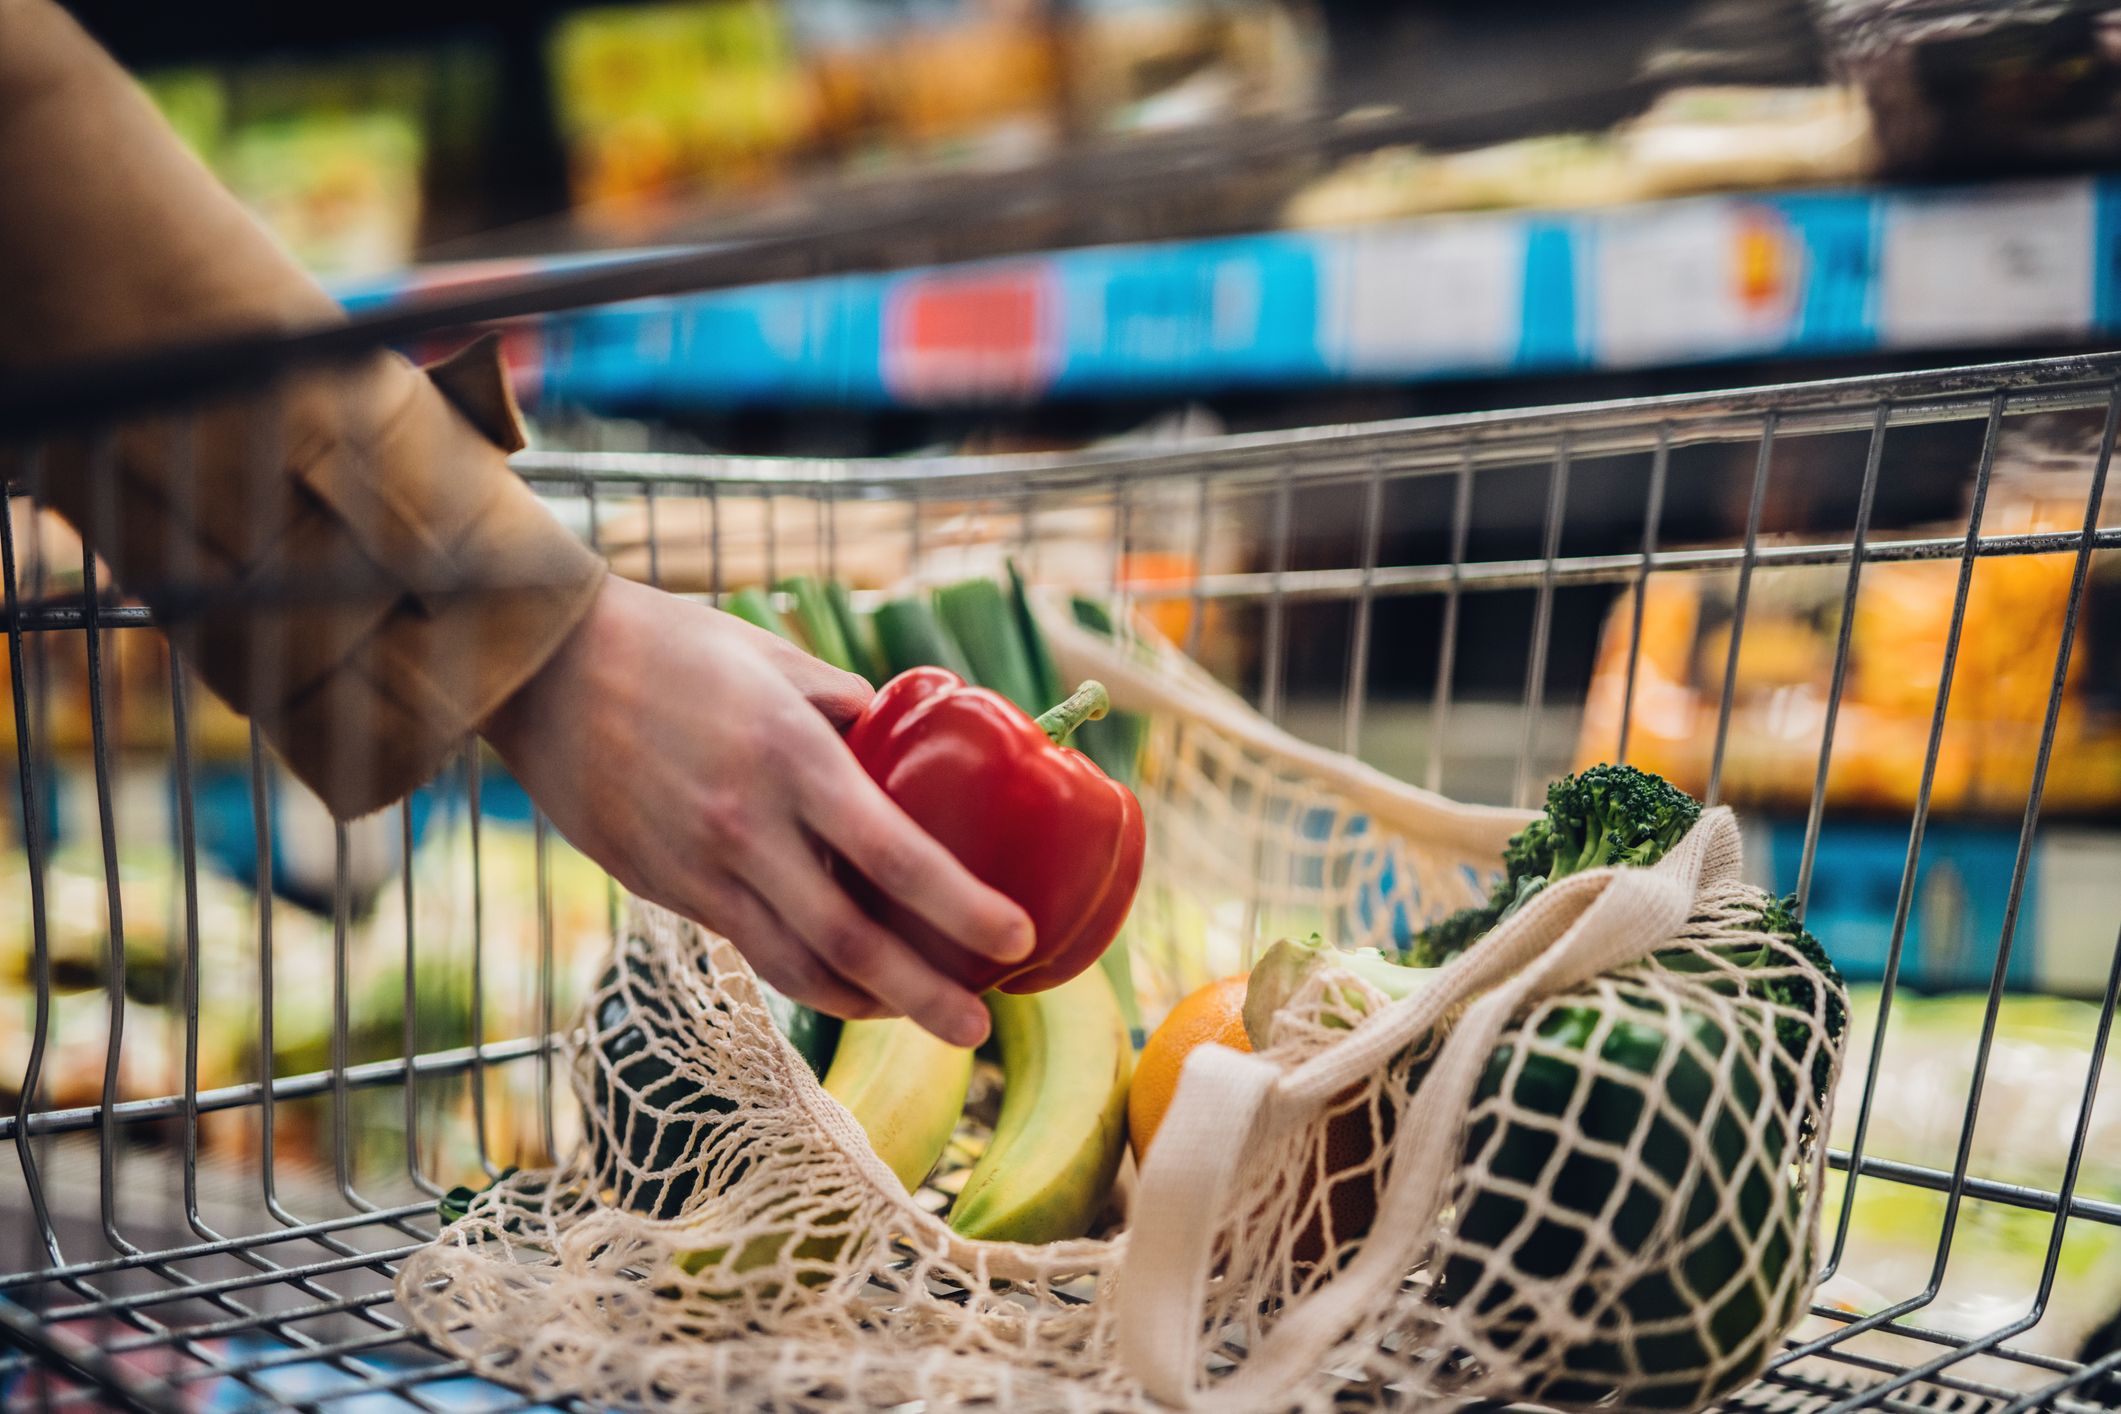 The Ultimate Healthy Grocery List, According to Dietitians